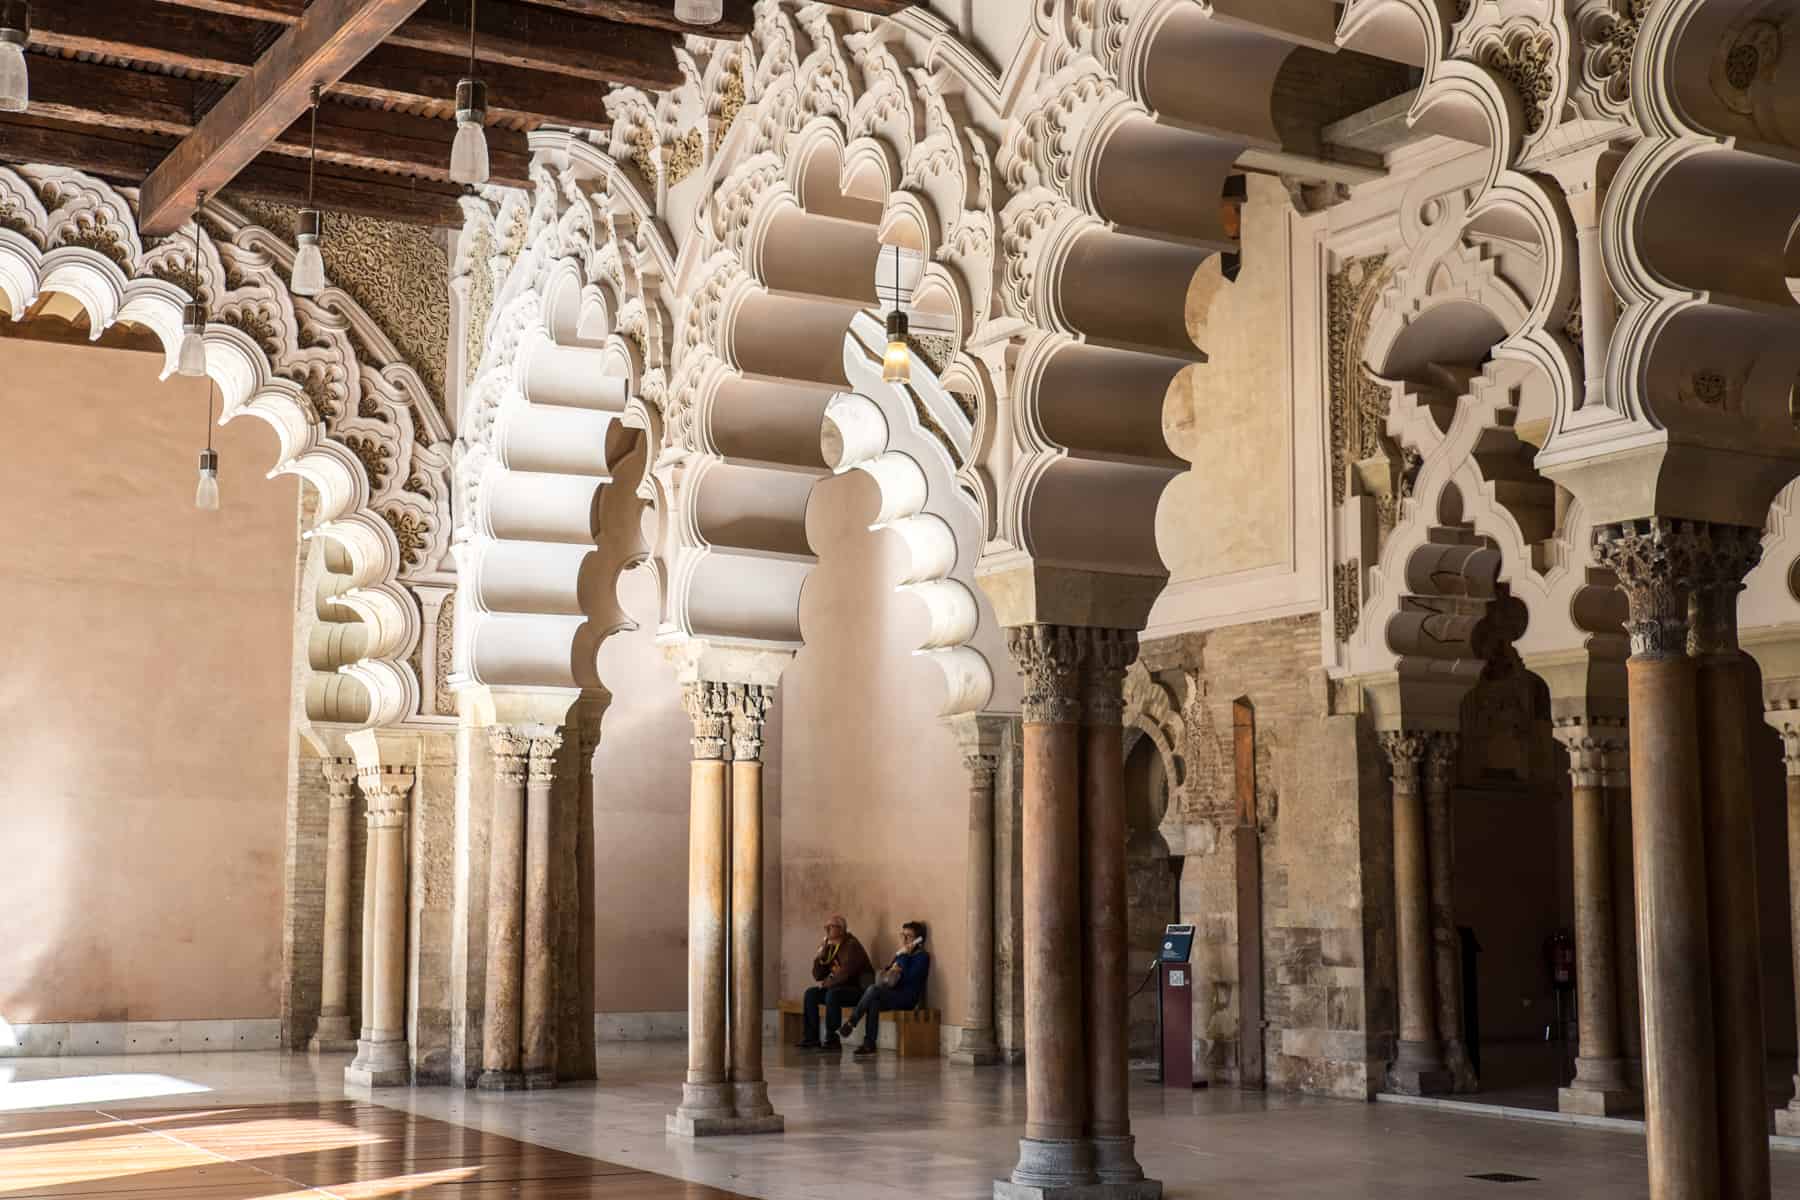 Two people sit at the back corner of a room filled with a sculptured archway of columns - the Islamic style Mudejar art inside Ajafería Palace.